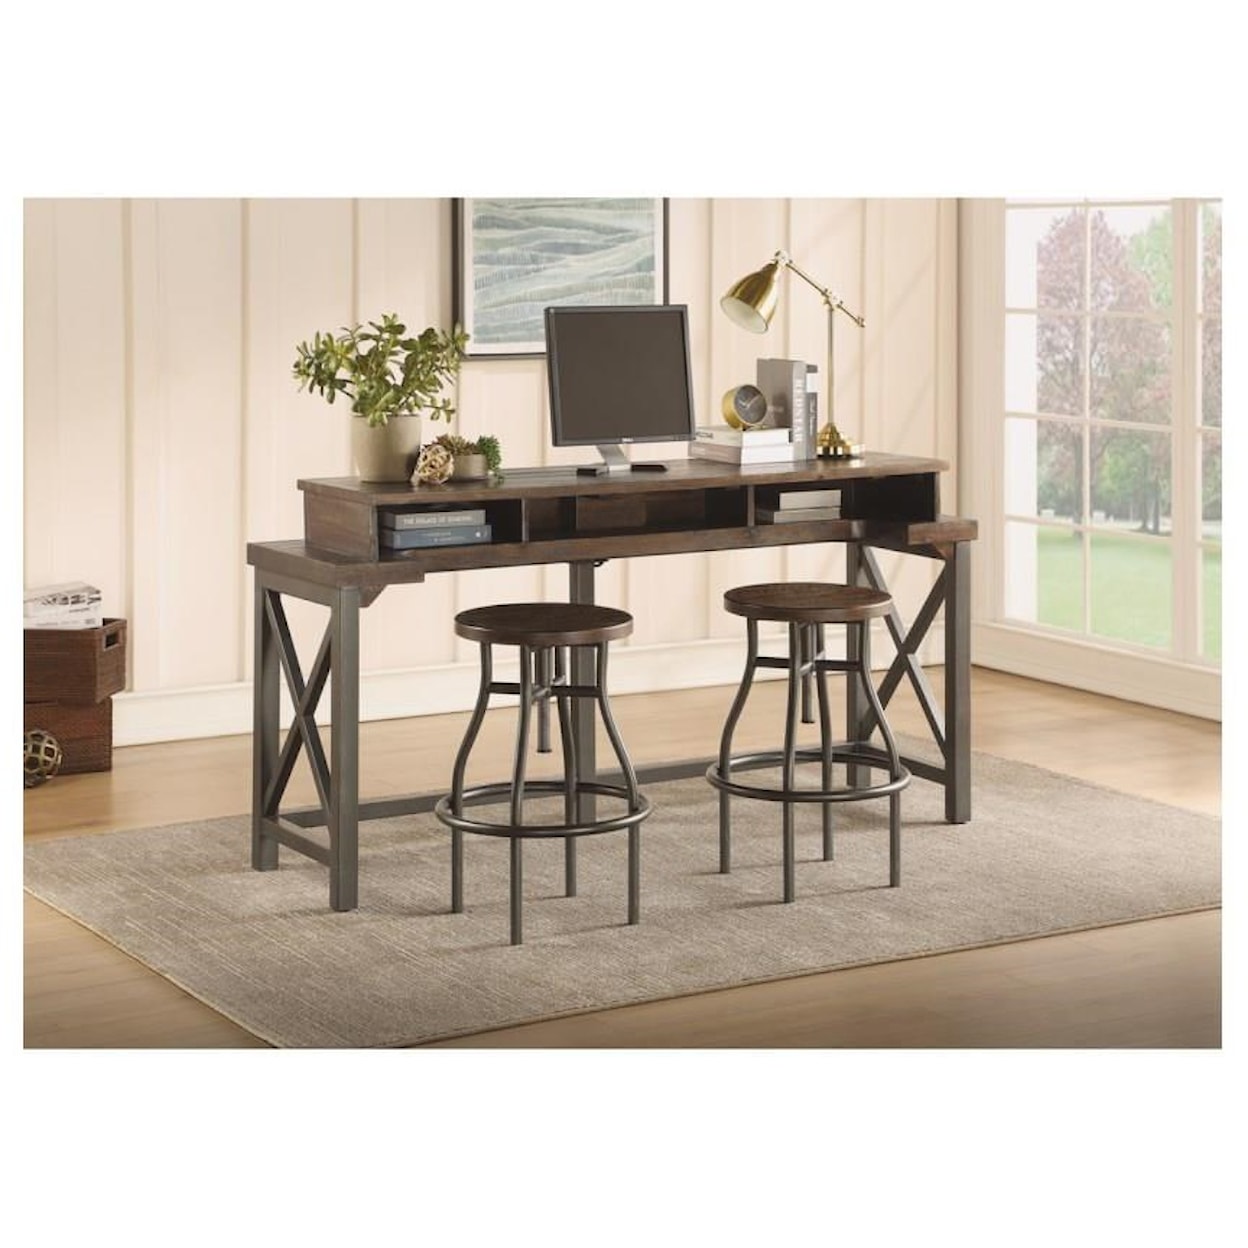 Flexsteel Wynwood Collection Carpenter Work Console with 2 Stools